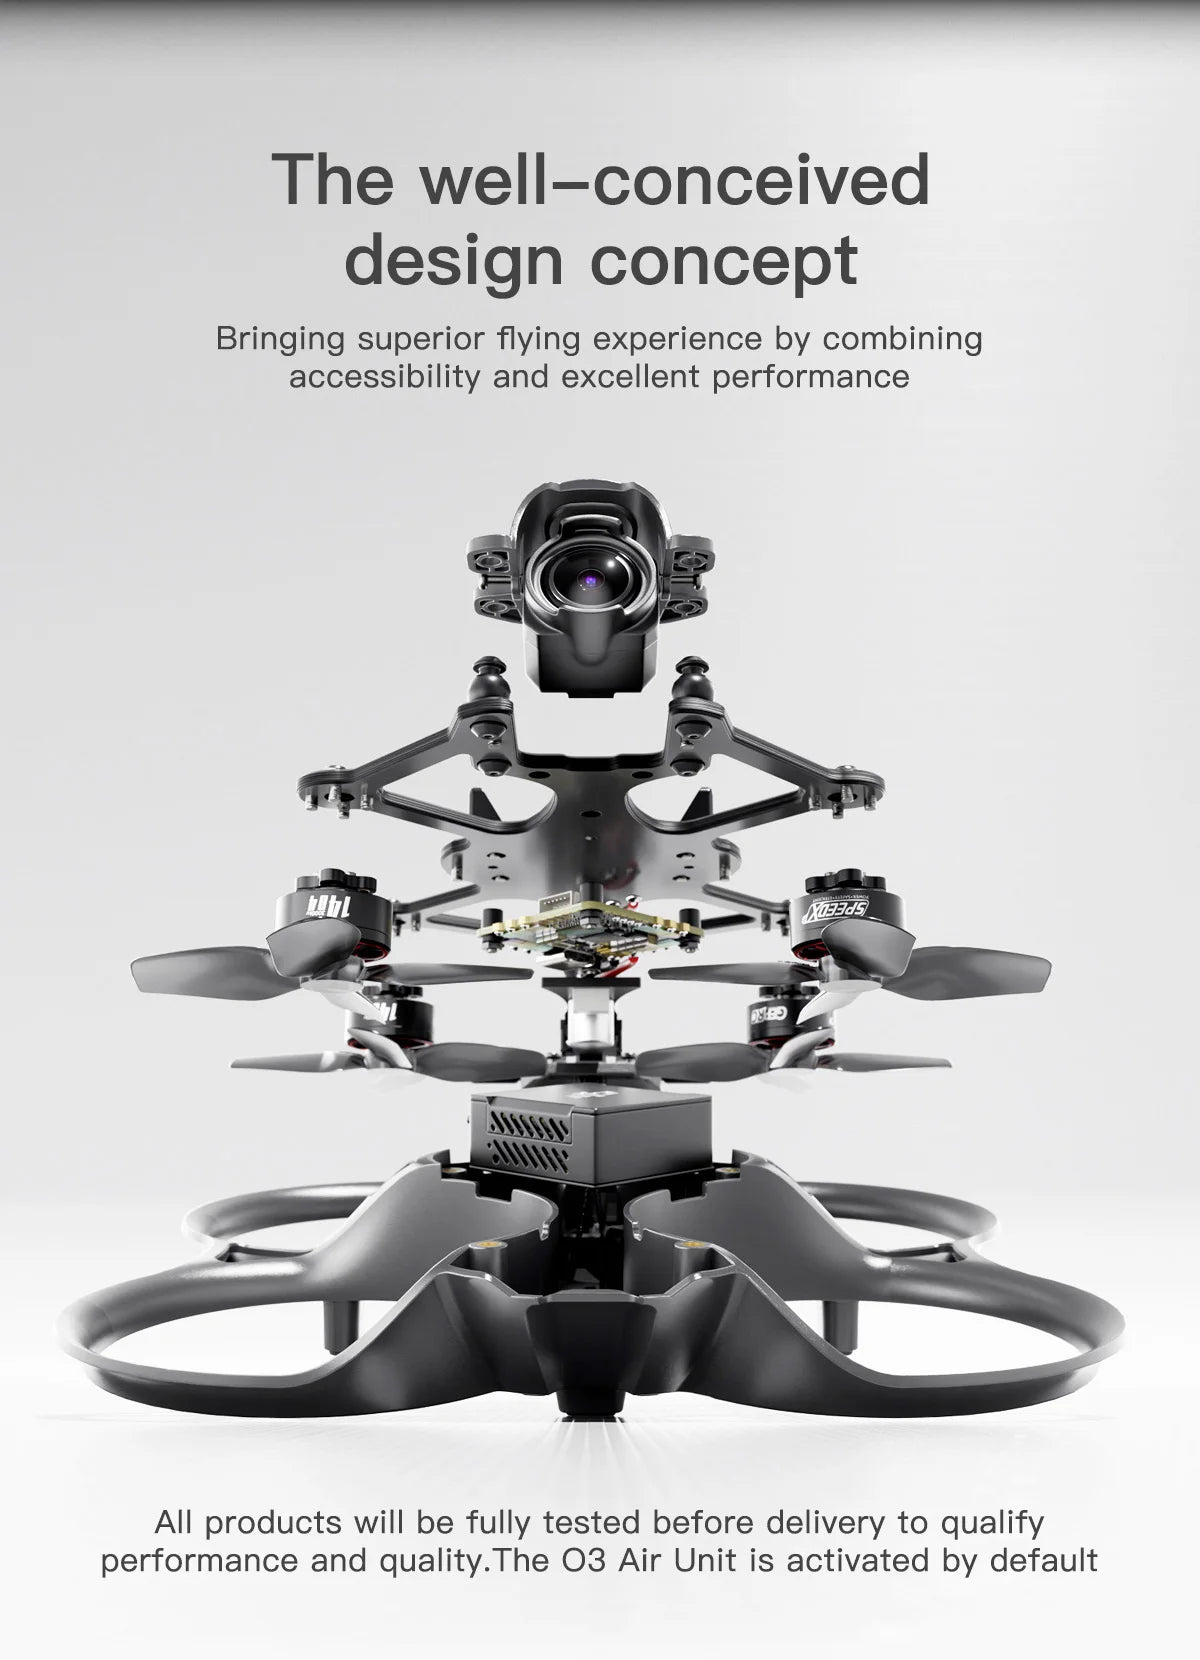 GEPRC Cinebot25 S WTFPV 2.5inch FPV Drone, the well-conceived design concept Bringing superior flying experience by combining accessibility and excellent performance 